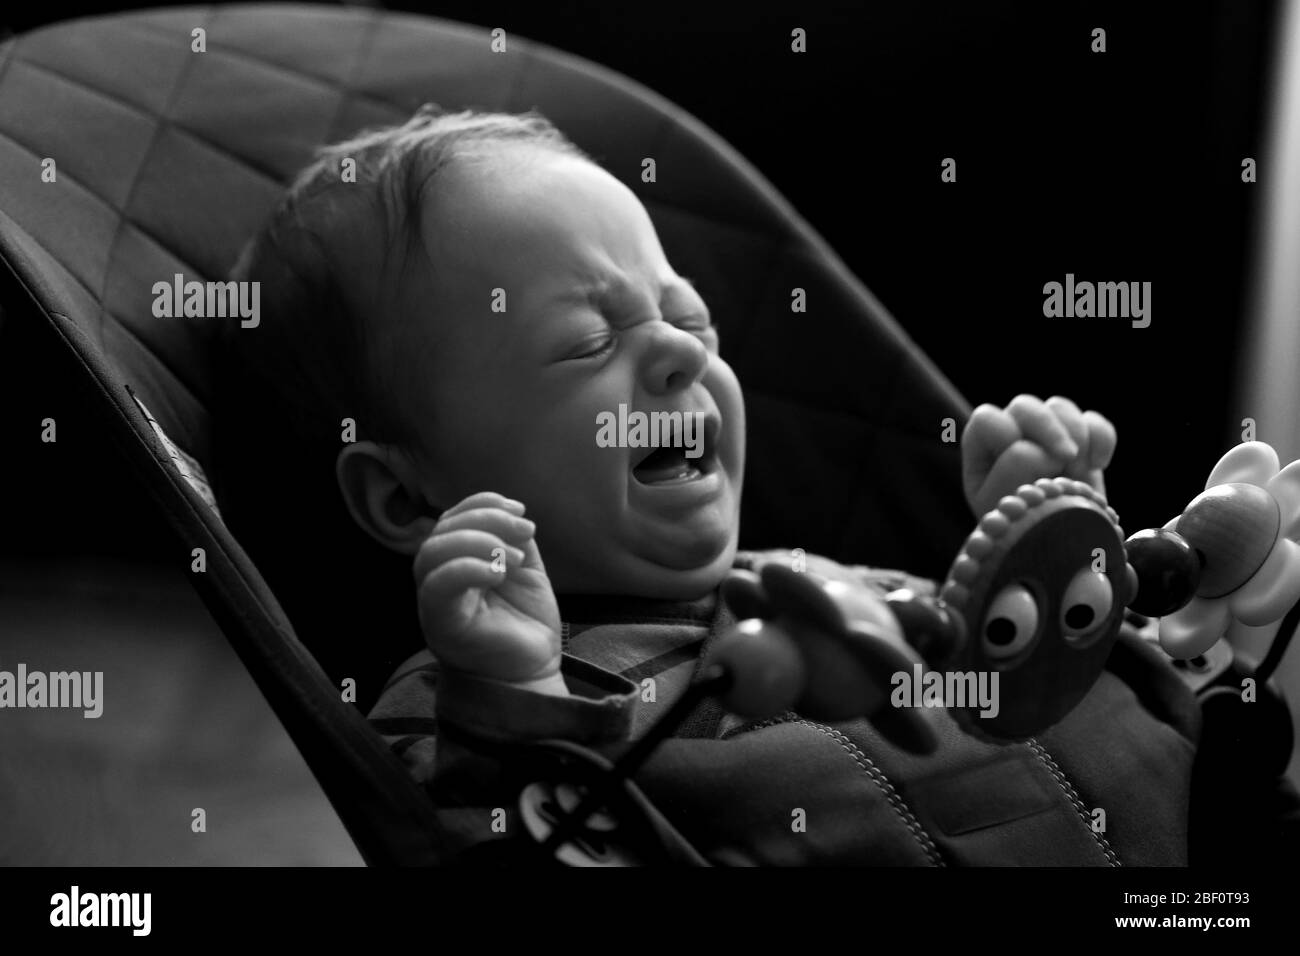 Baby crying Black and White Stock Photos & Images - Alamy